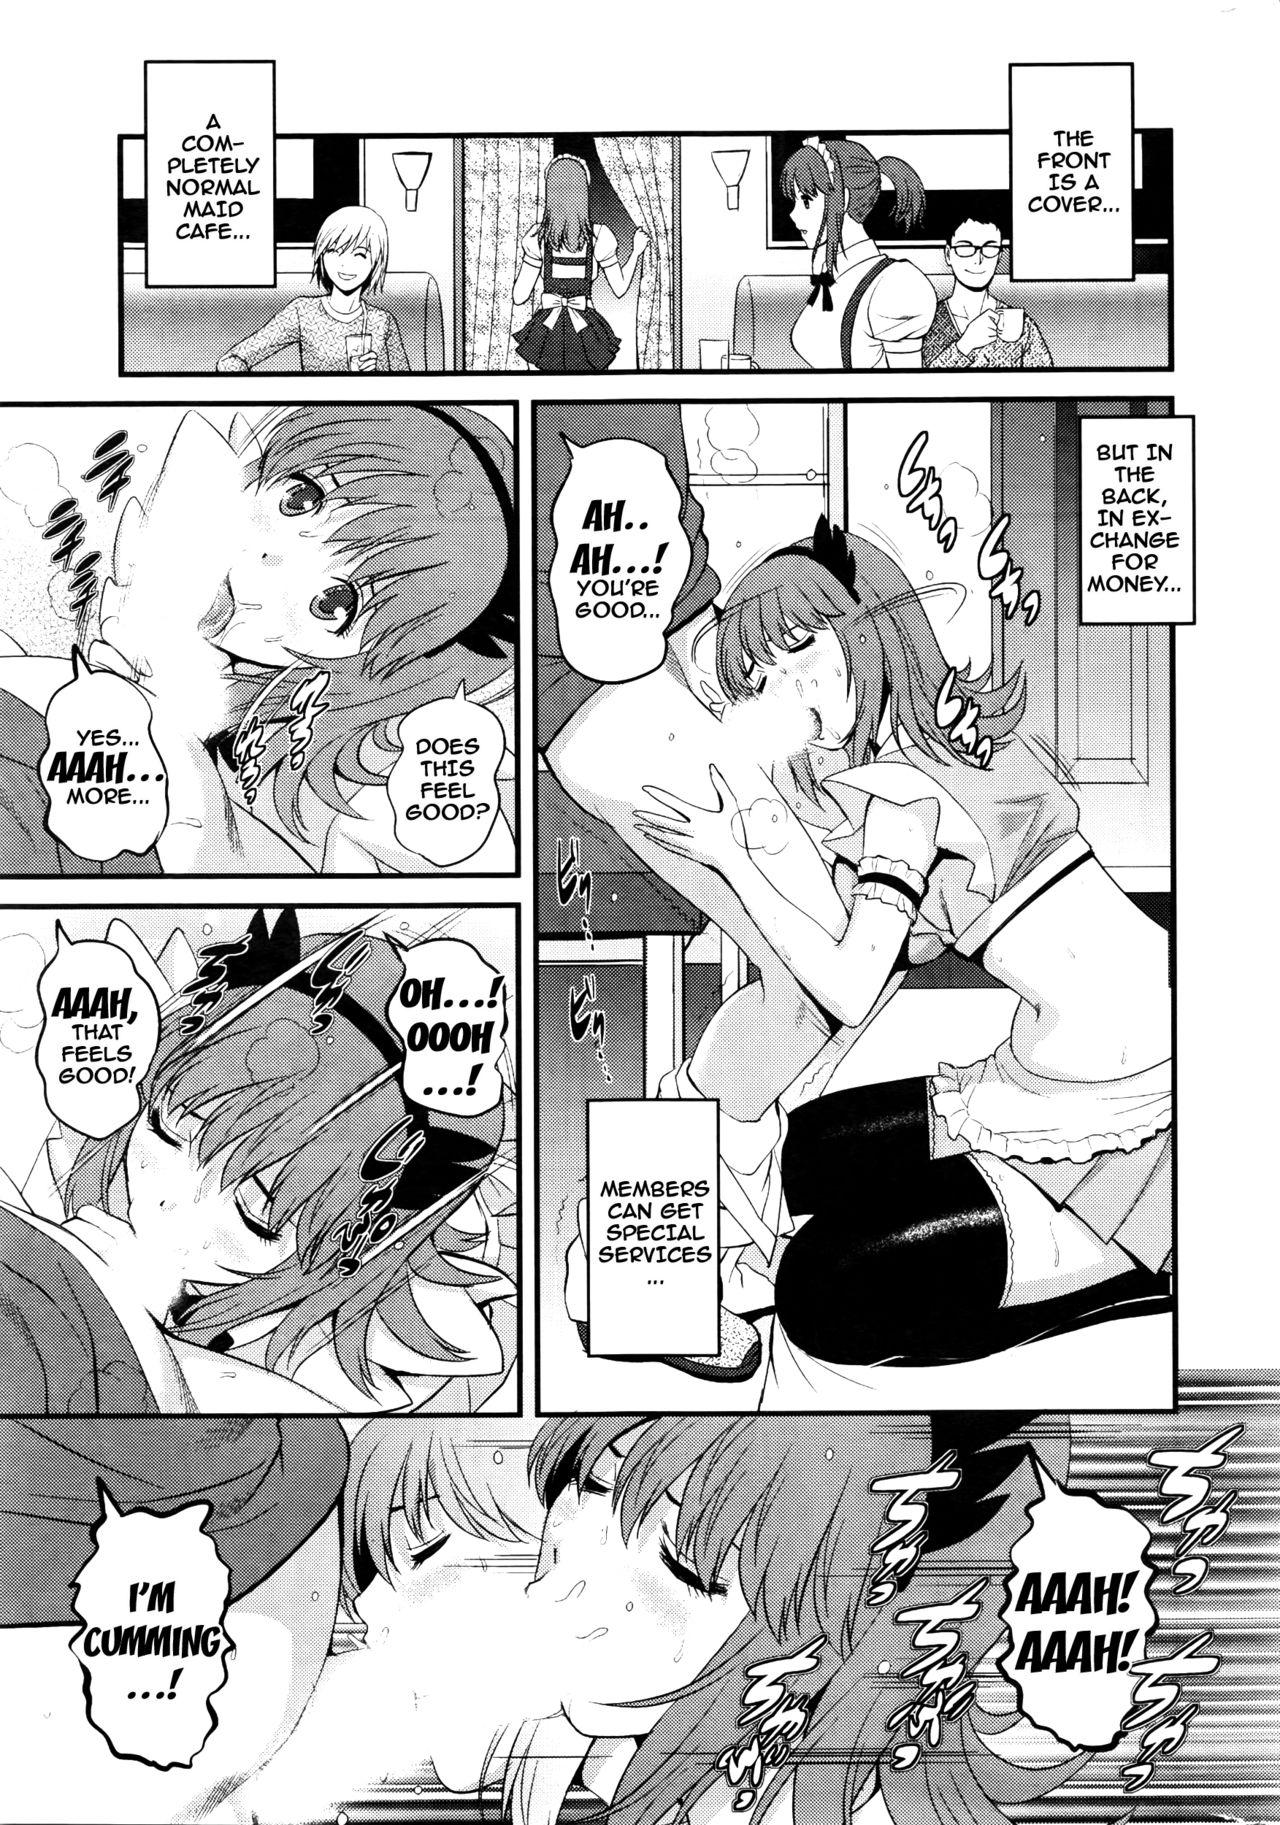 Ink [Saigado] Part Time Manaka-san 2nd Ch. 1-5 [English] {doujins.com} [Incomplete] Free Oral Sex - Page 8